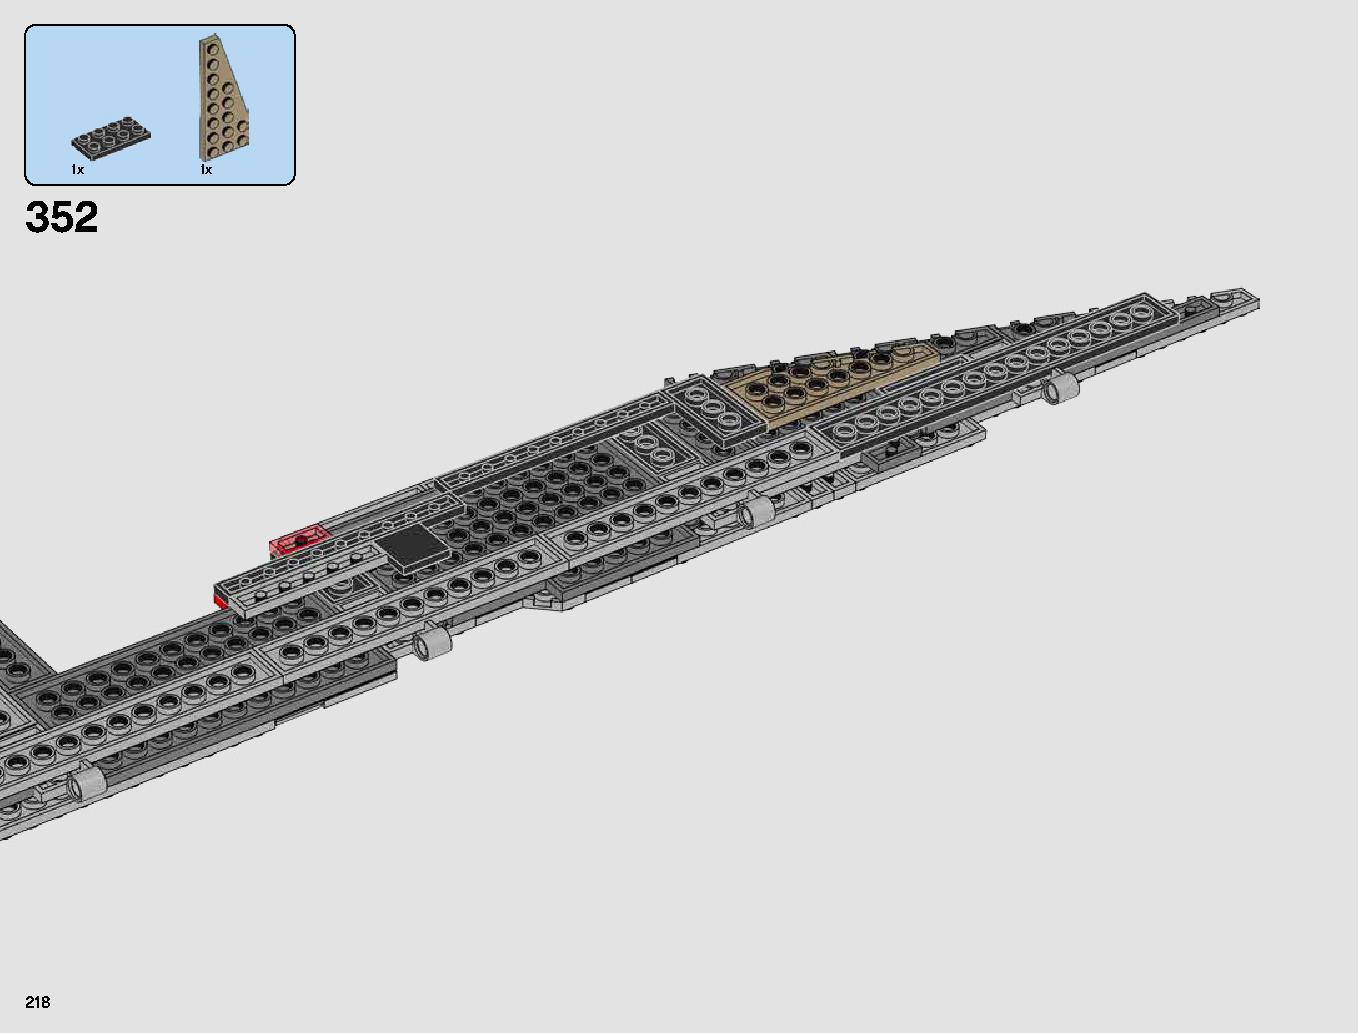 First Order Star Destroyer 75190 レゴの商品情報 レゴの説明書・組立方法 218 page